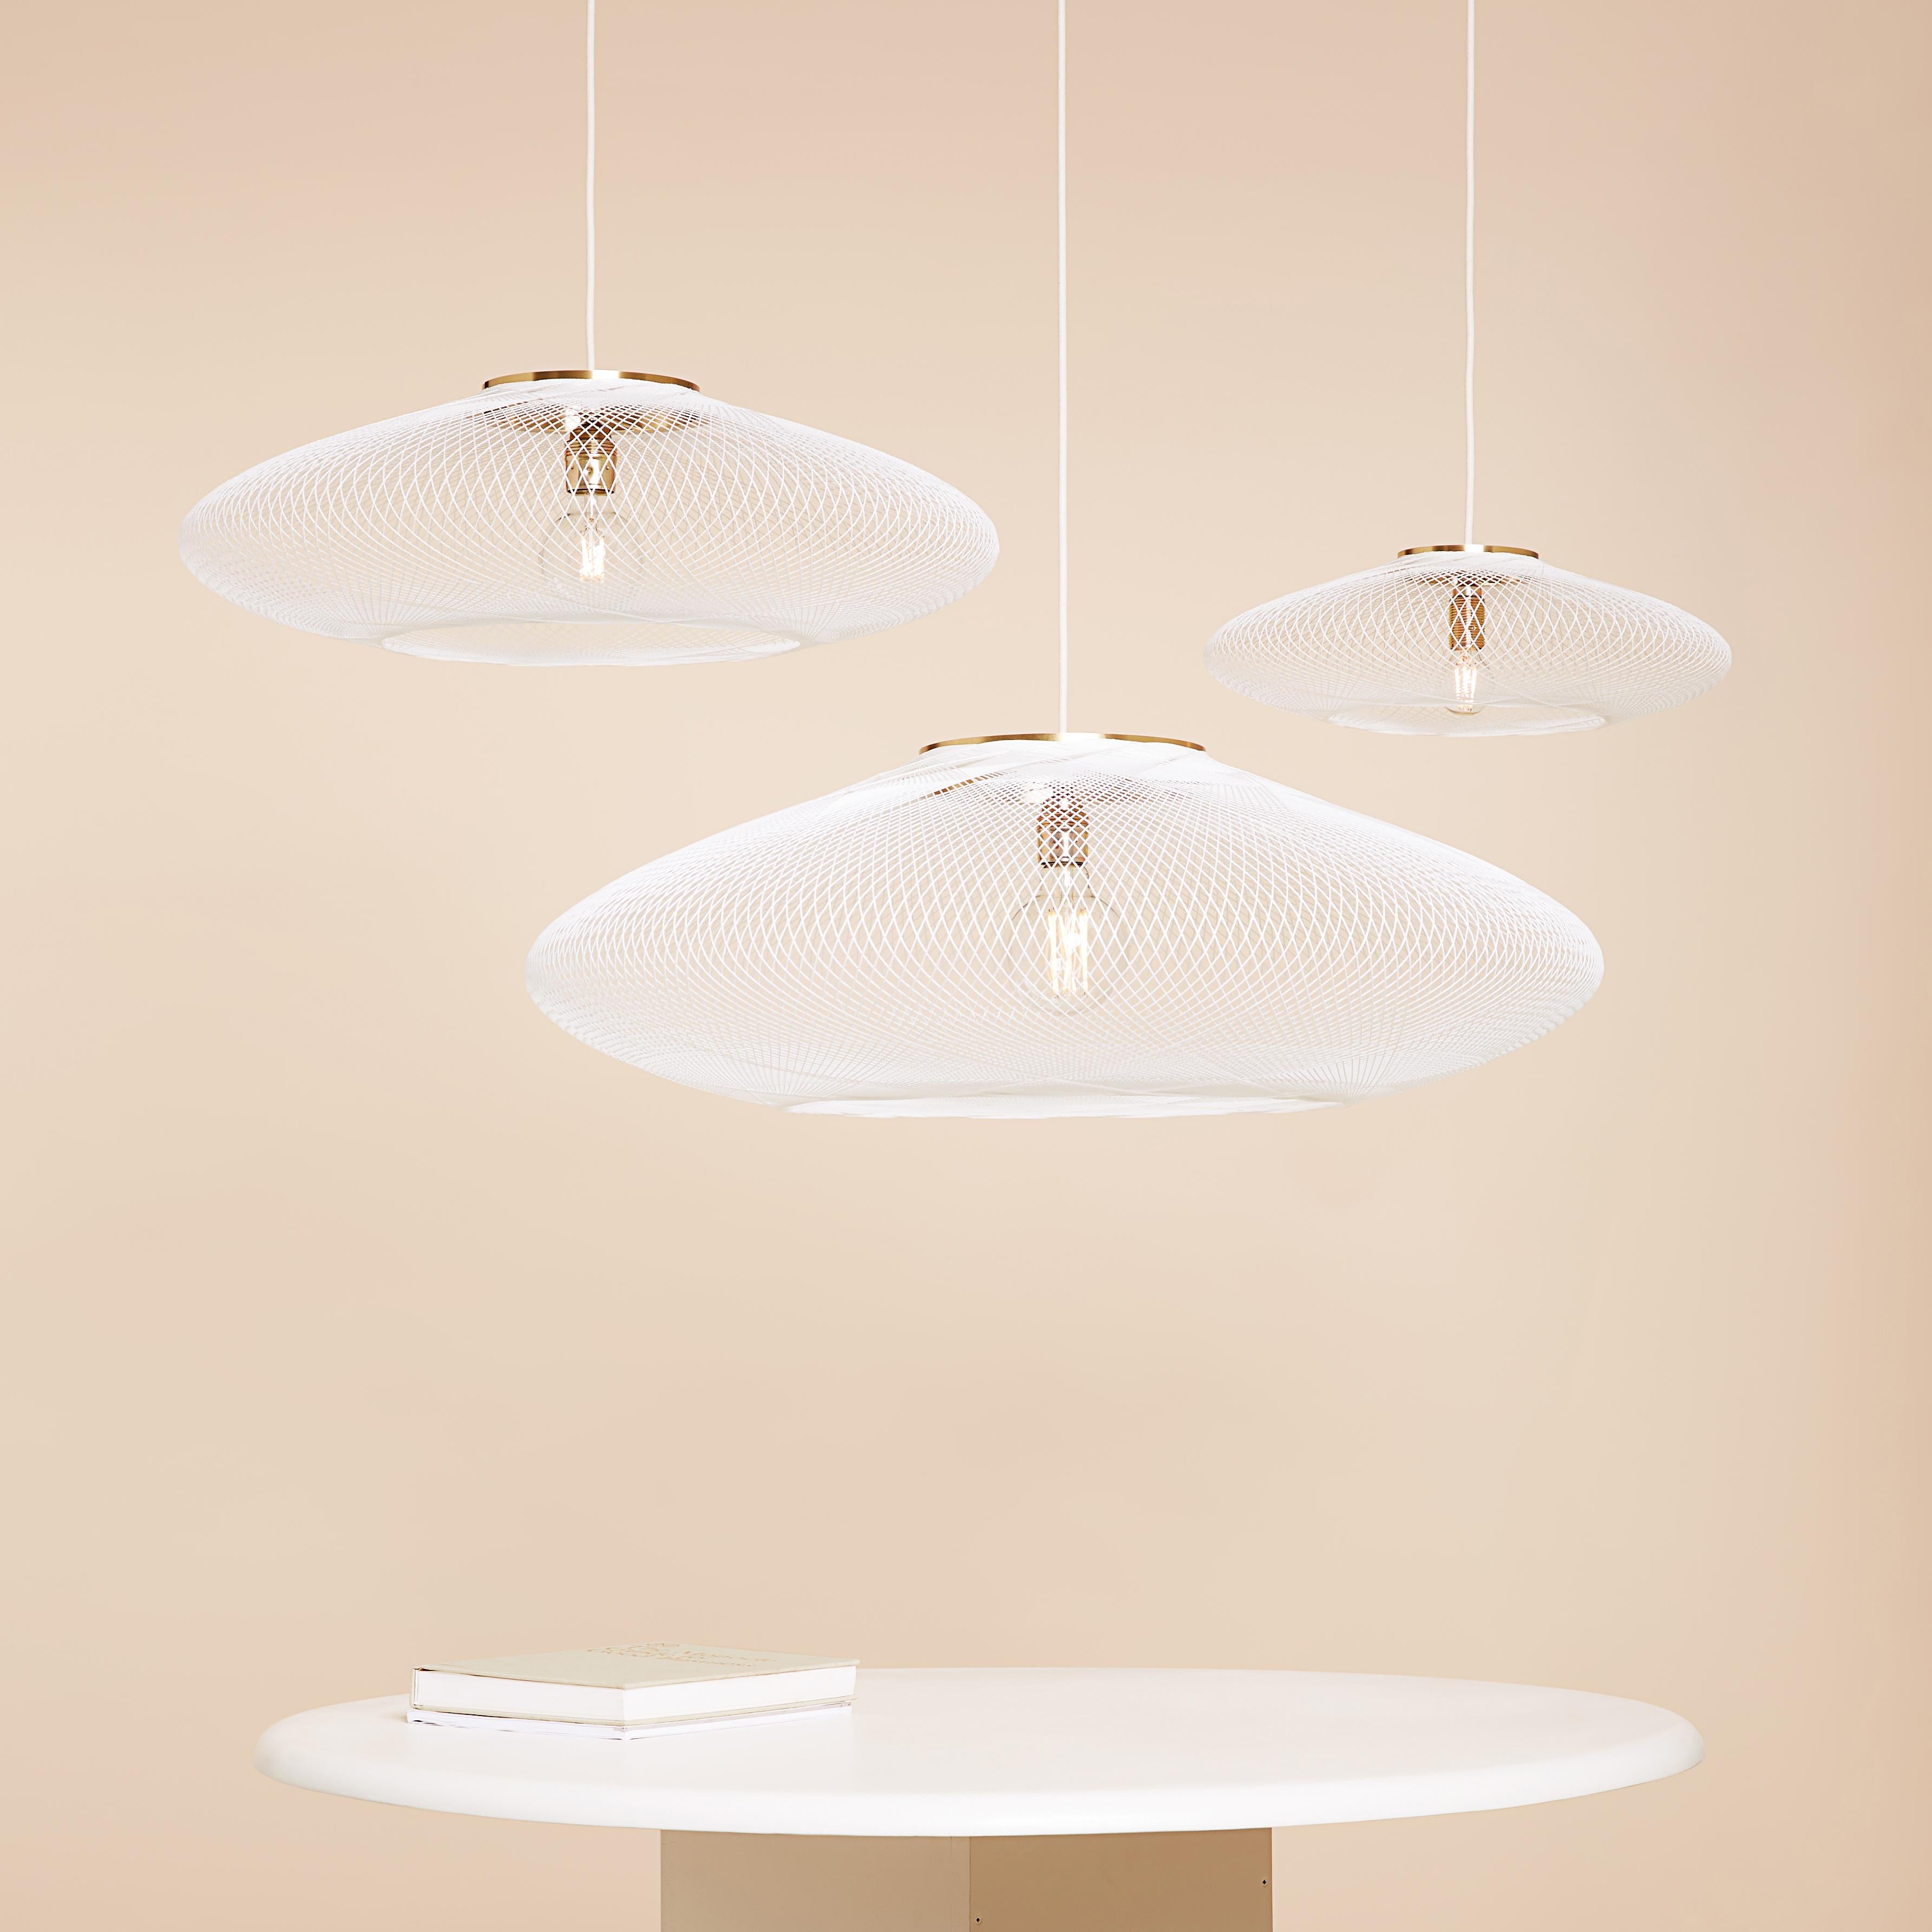 Large White UFO pendant lamp by Atelier Robotiq
Dimensions: D 80 x H 24 cm
Materials: Resin-impregnated industrial fiber, brass.
Available with holder in copper/ brass/ black coated stainless steel.
Available in different colors, 3 sizes, and in